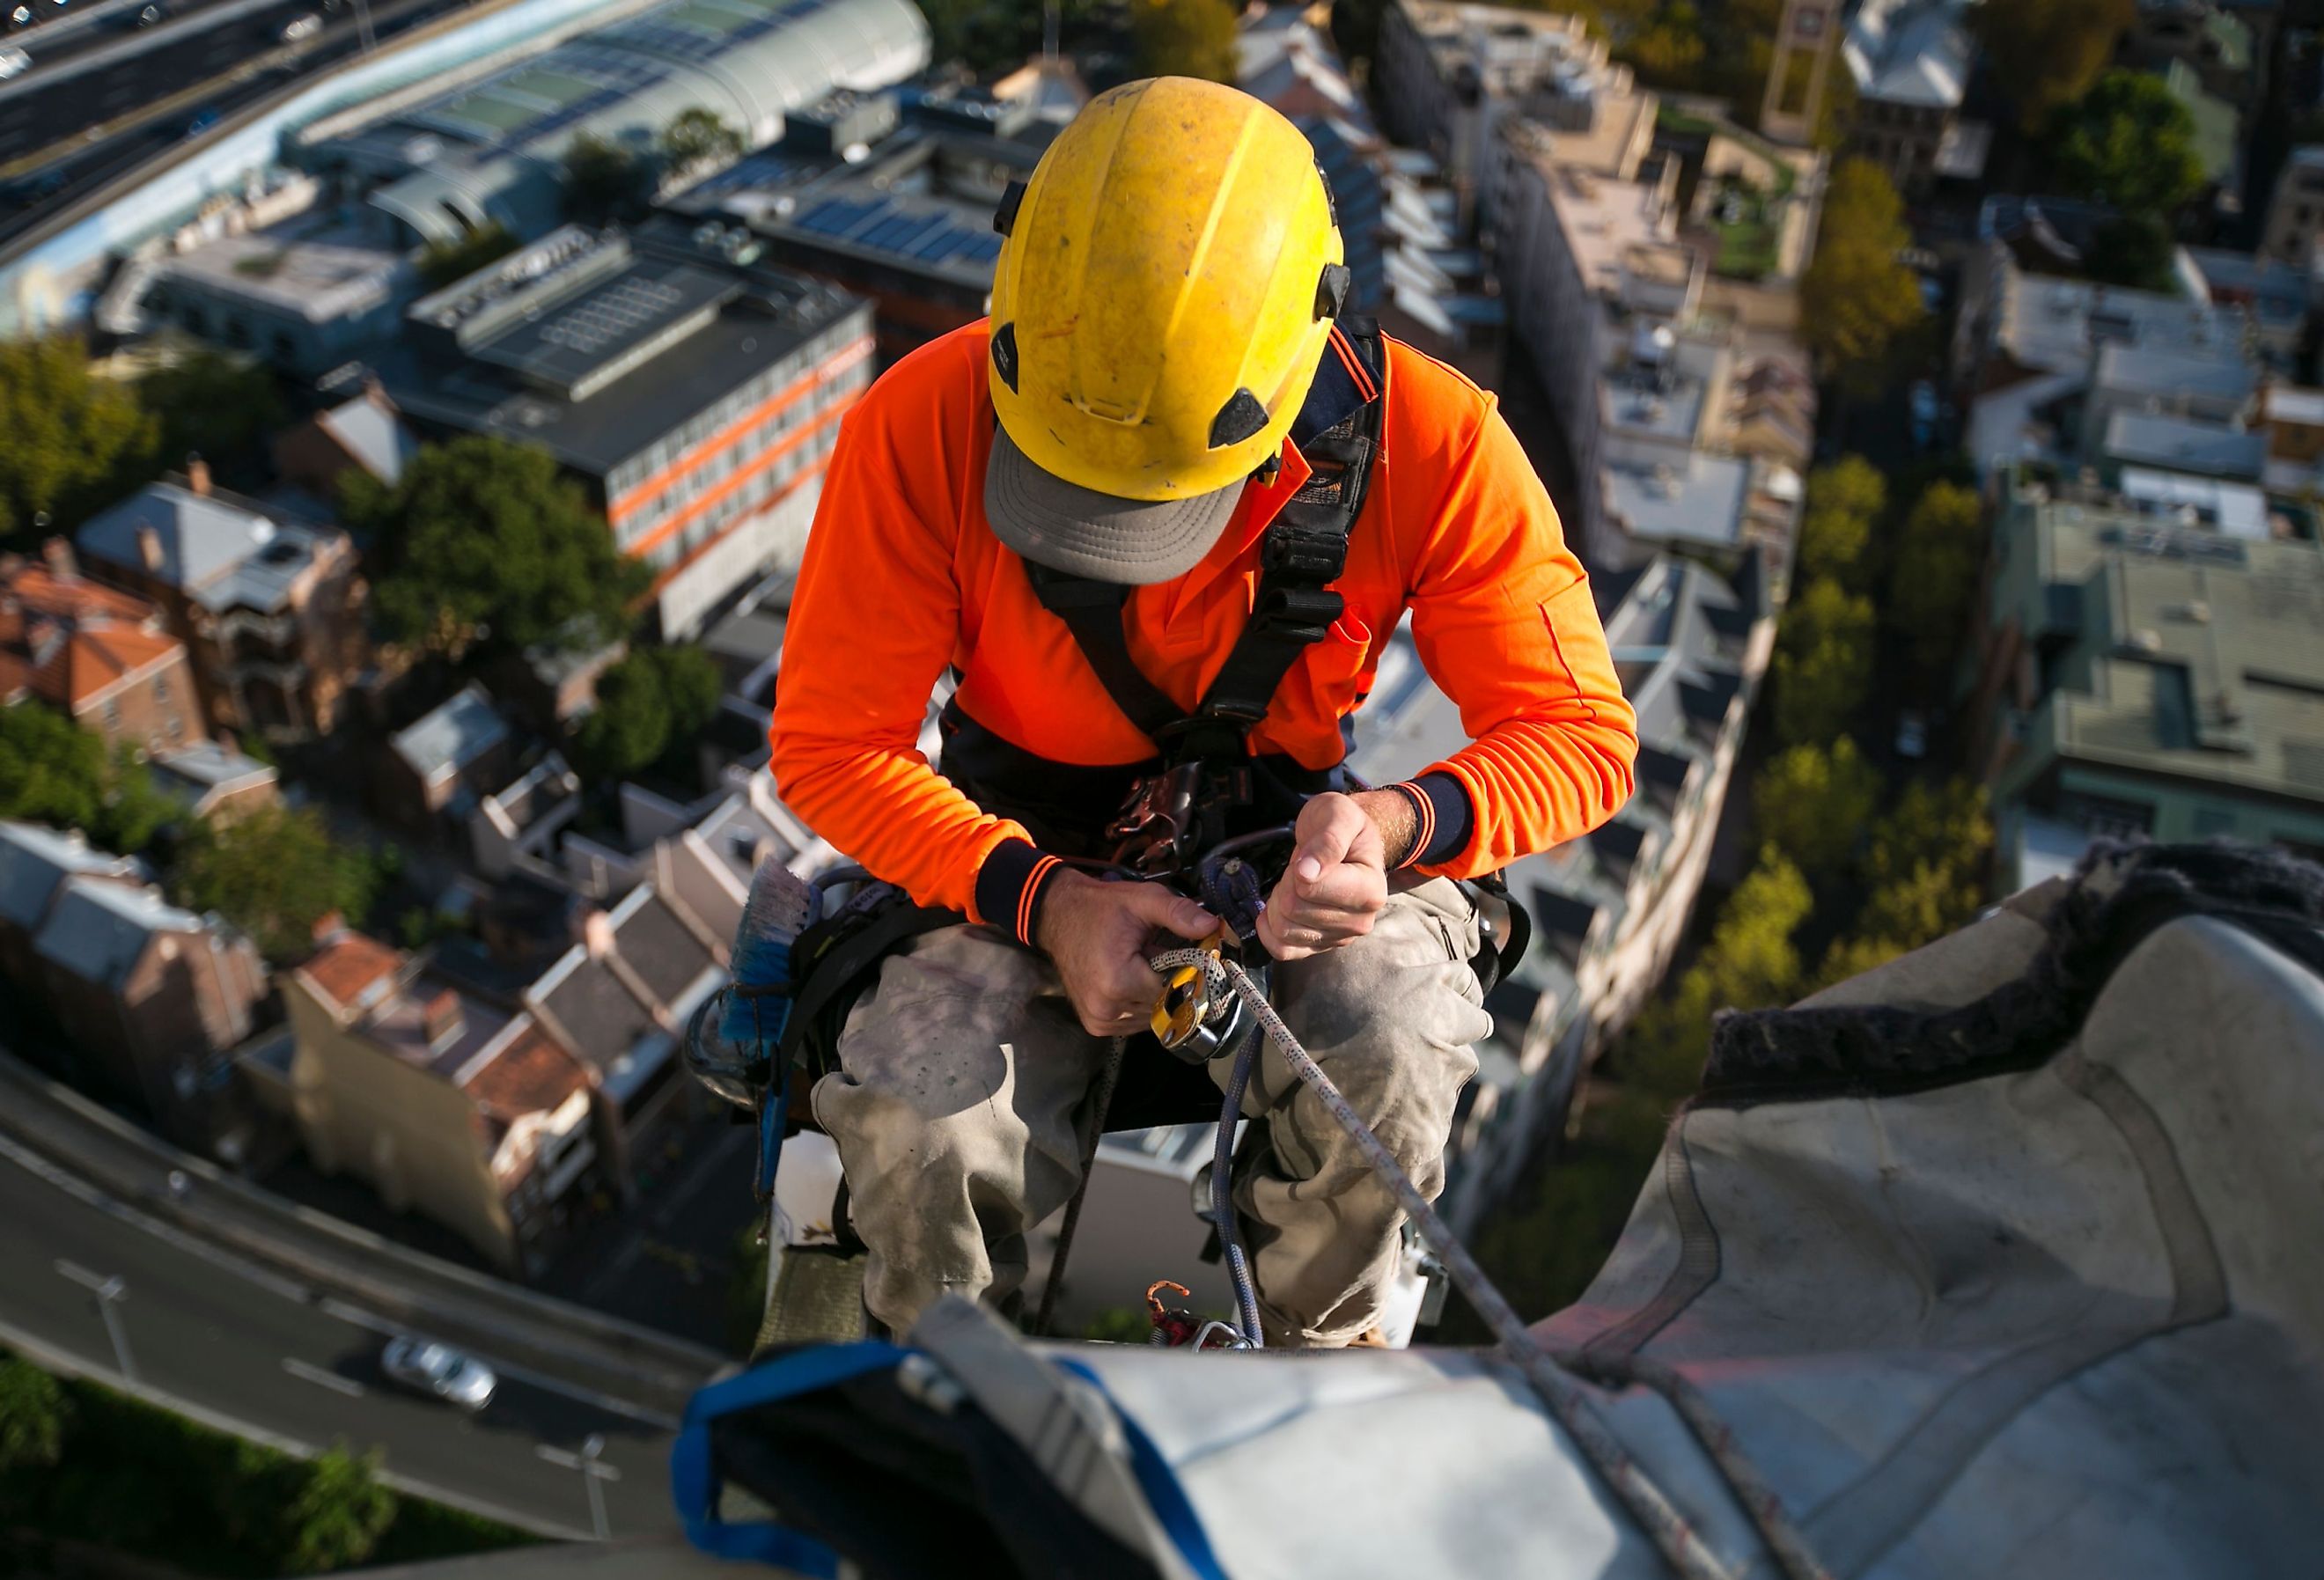 High rise construction worker. Image credit: King Ropes Access via Shutterstock